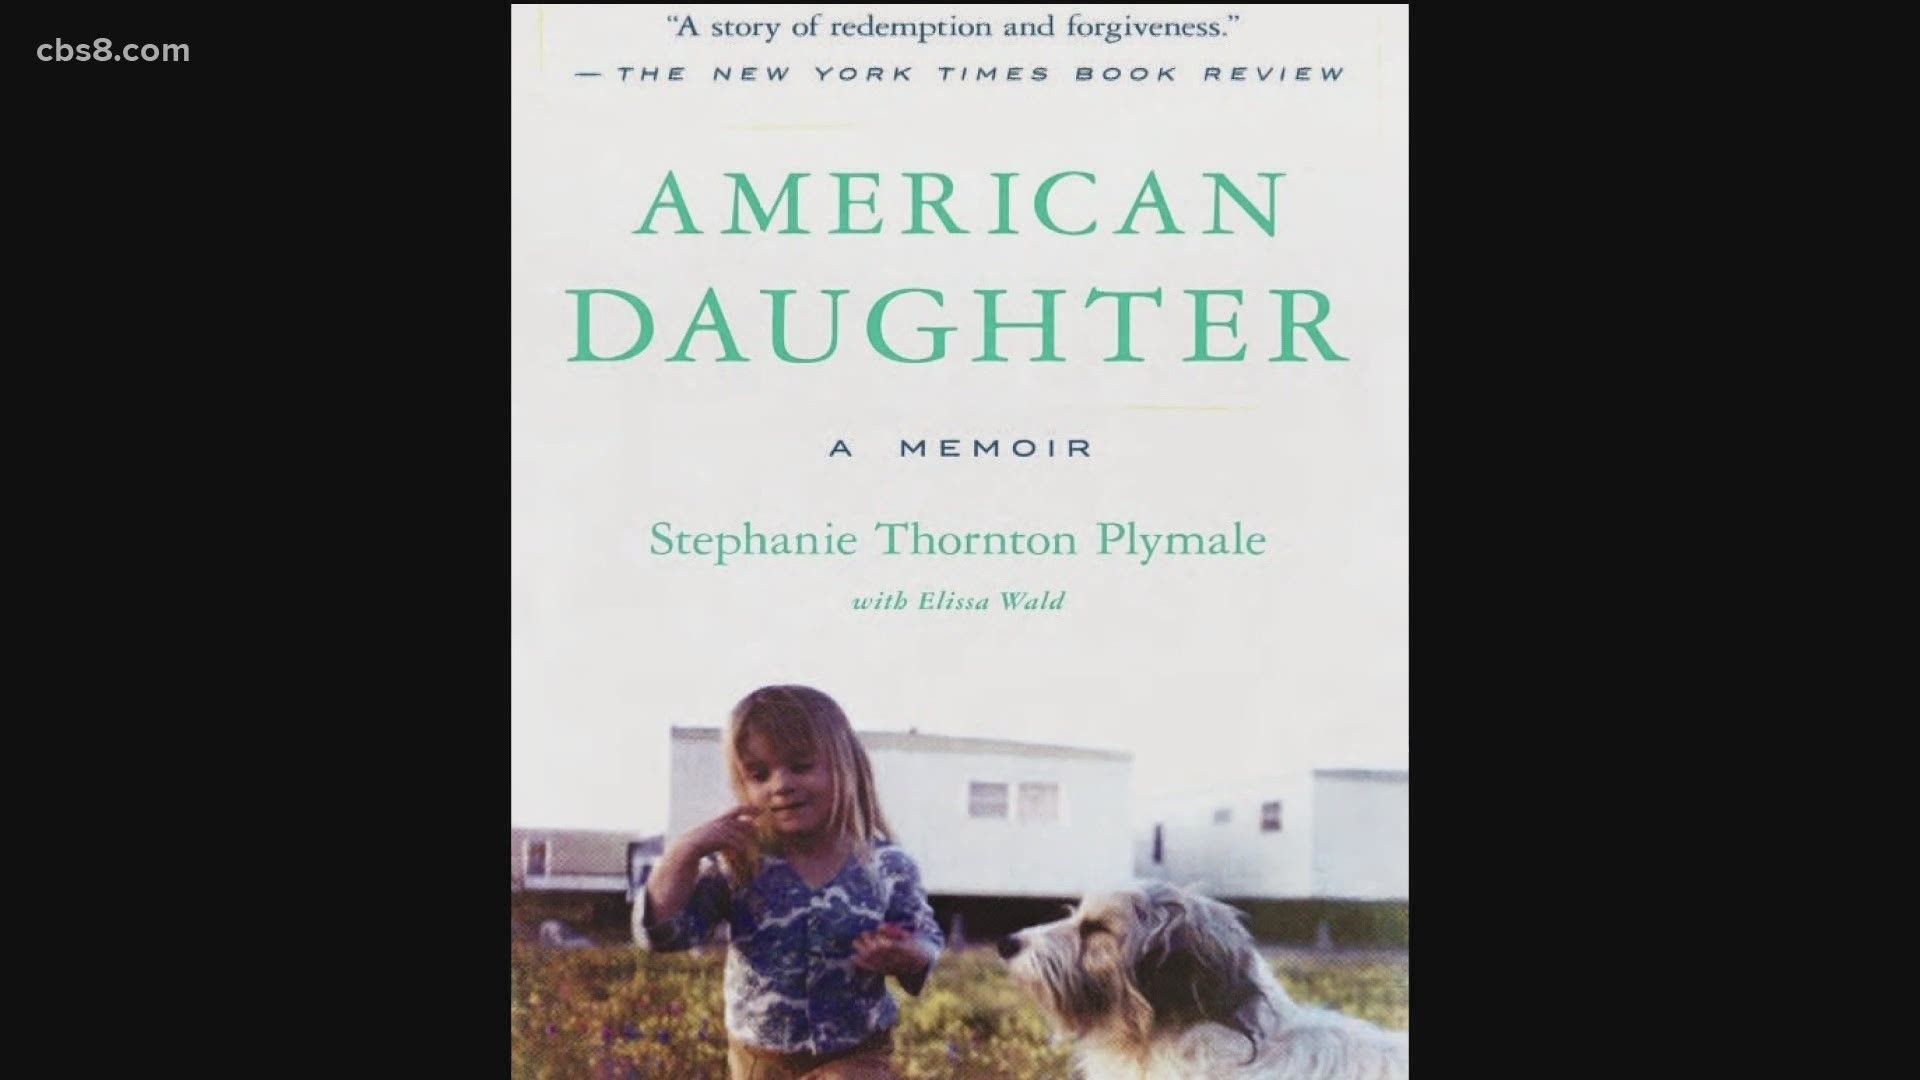 A Memoir of Intergenerational Trauma, a Mother's Dark Secrets, and a Daughter's Quest for Redemption by Stephanie Thornton Plymale